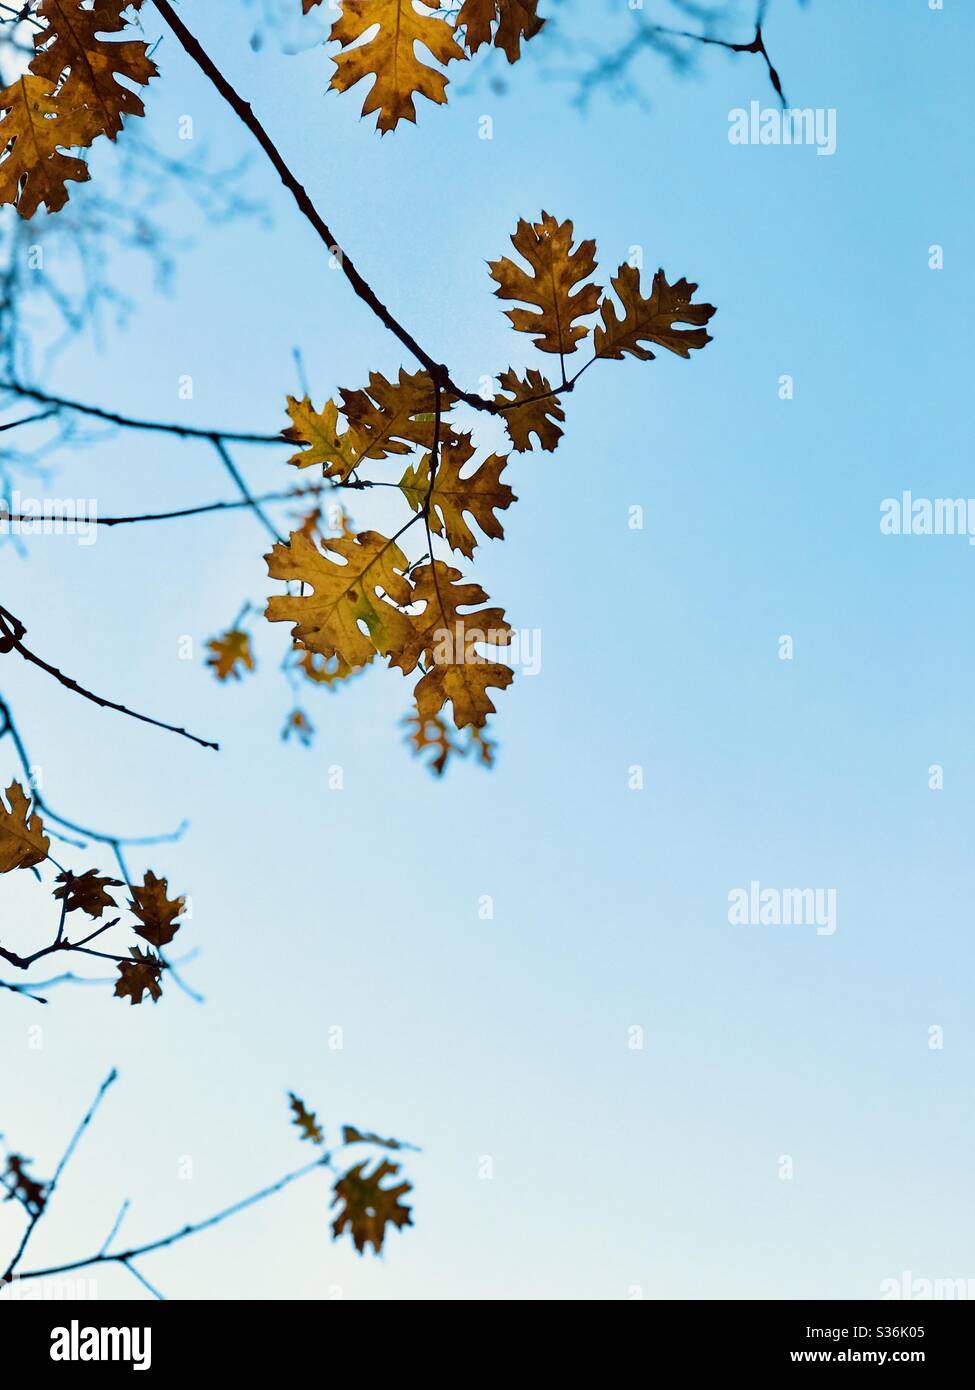 A branch of golden oak leaves hanging on the branches with a blue sky in the background. Stock Photo